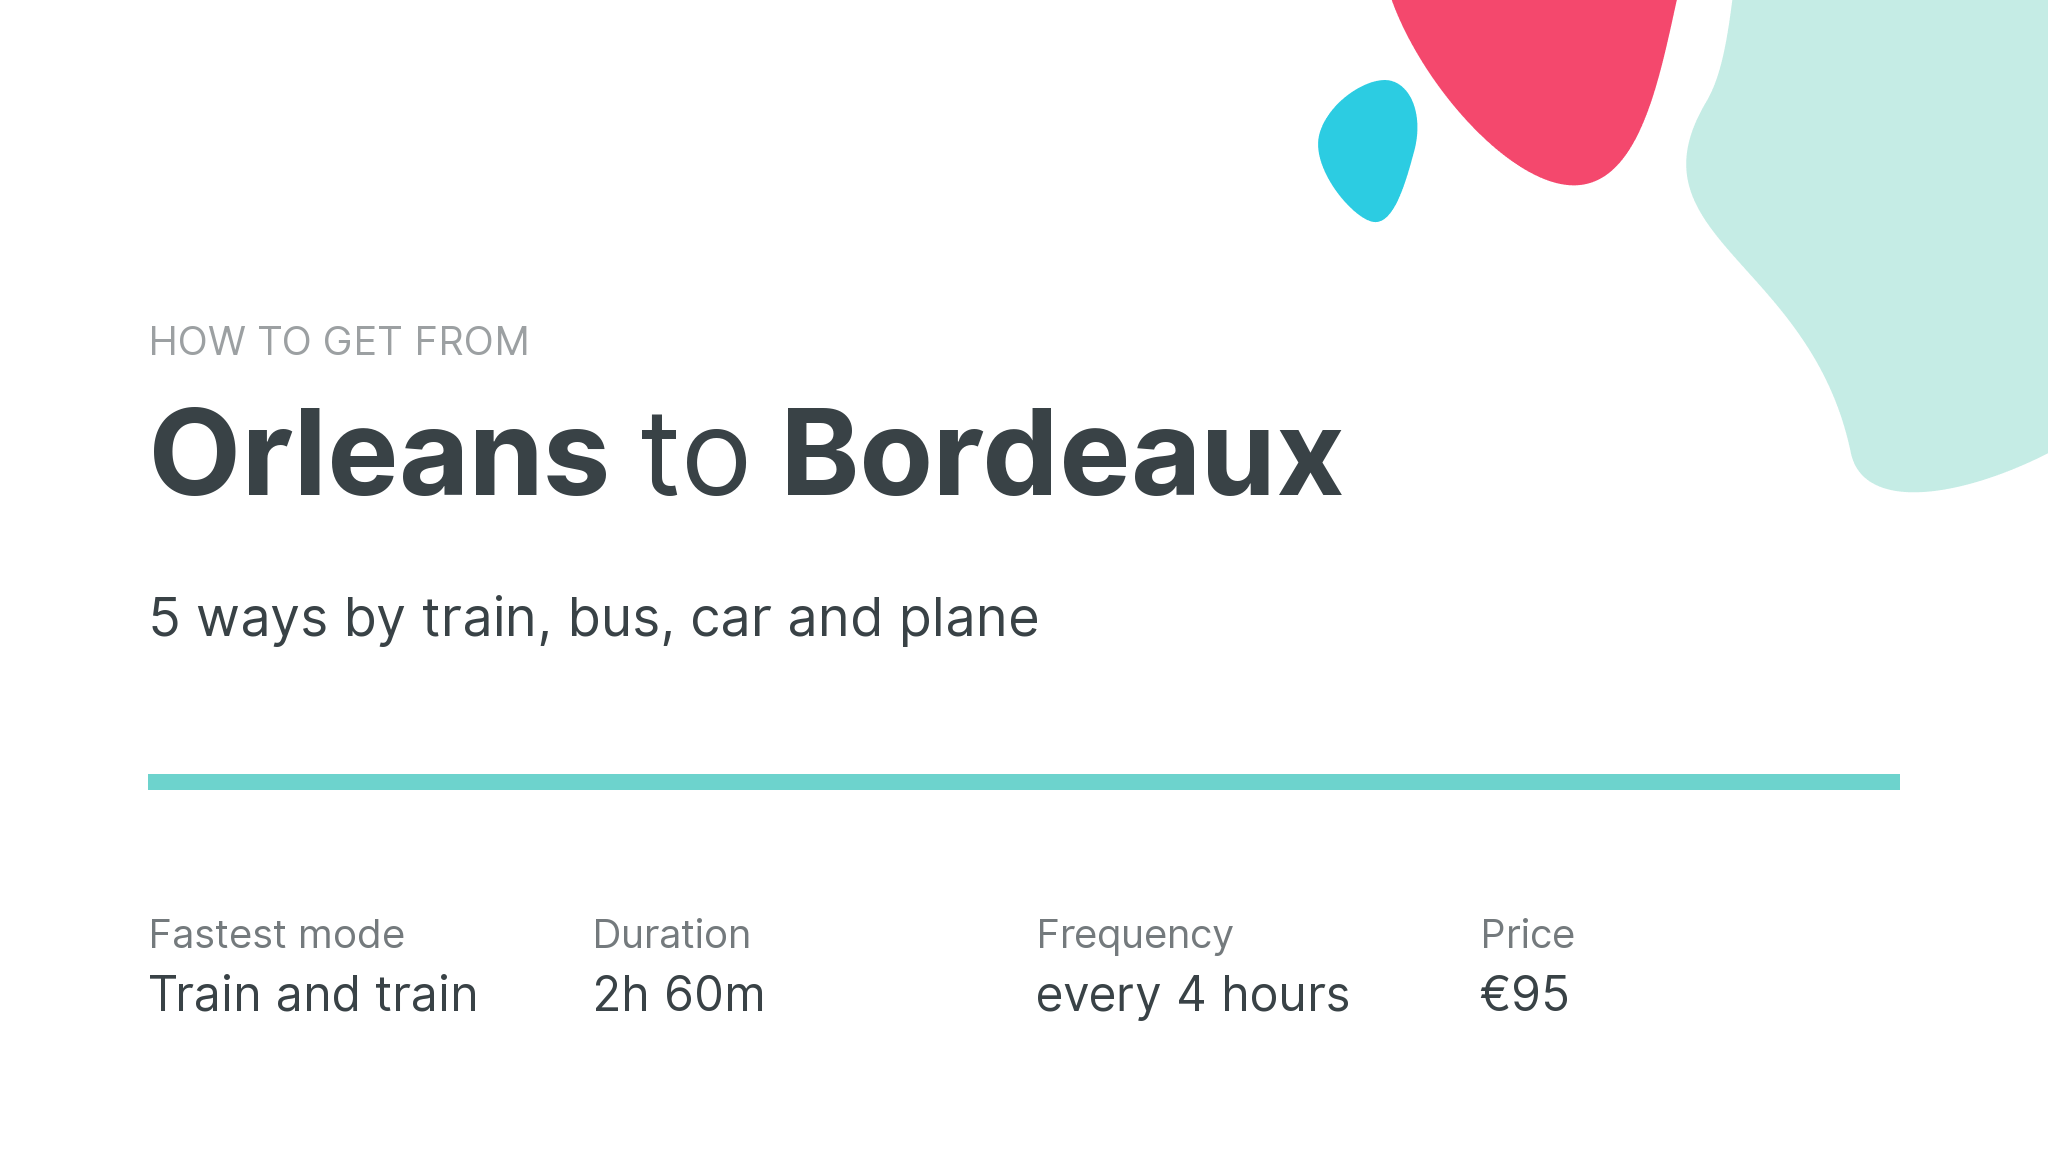 How do I get from Orleans to Bordeaux